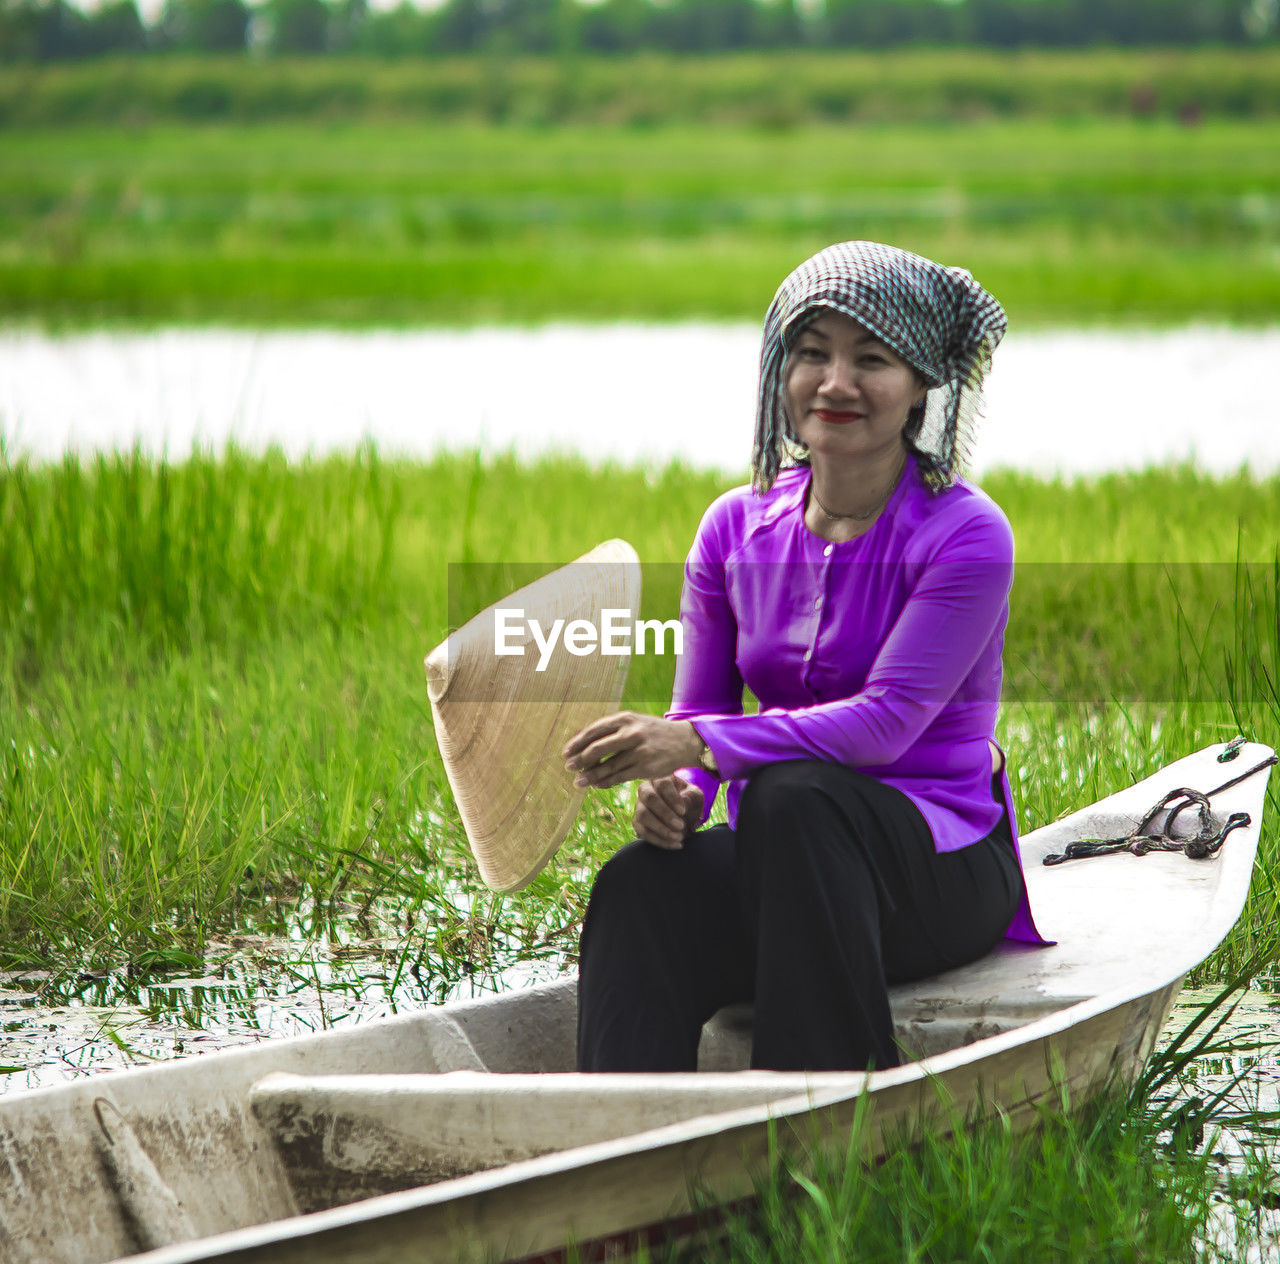 adult, one person, women, plant, sitting, nature, grass, water, relaxation, lifestyles, female, clothing, landscape, leisure activity, rural scene, tranquility, lake, senior adult, outdoors, green, activity, paddy field, full length, day, field, mature adult, smiling, casual clothing, person, hat, purple, agriculture, tranquil scene, emotion, seniors, looking, environment, beauty in nature